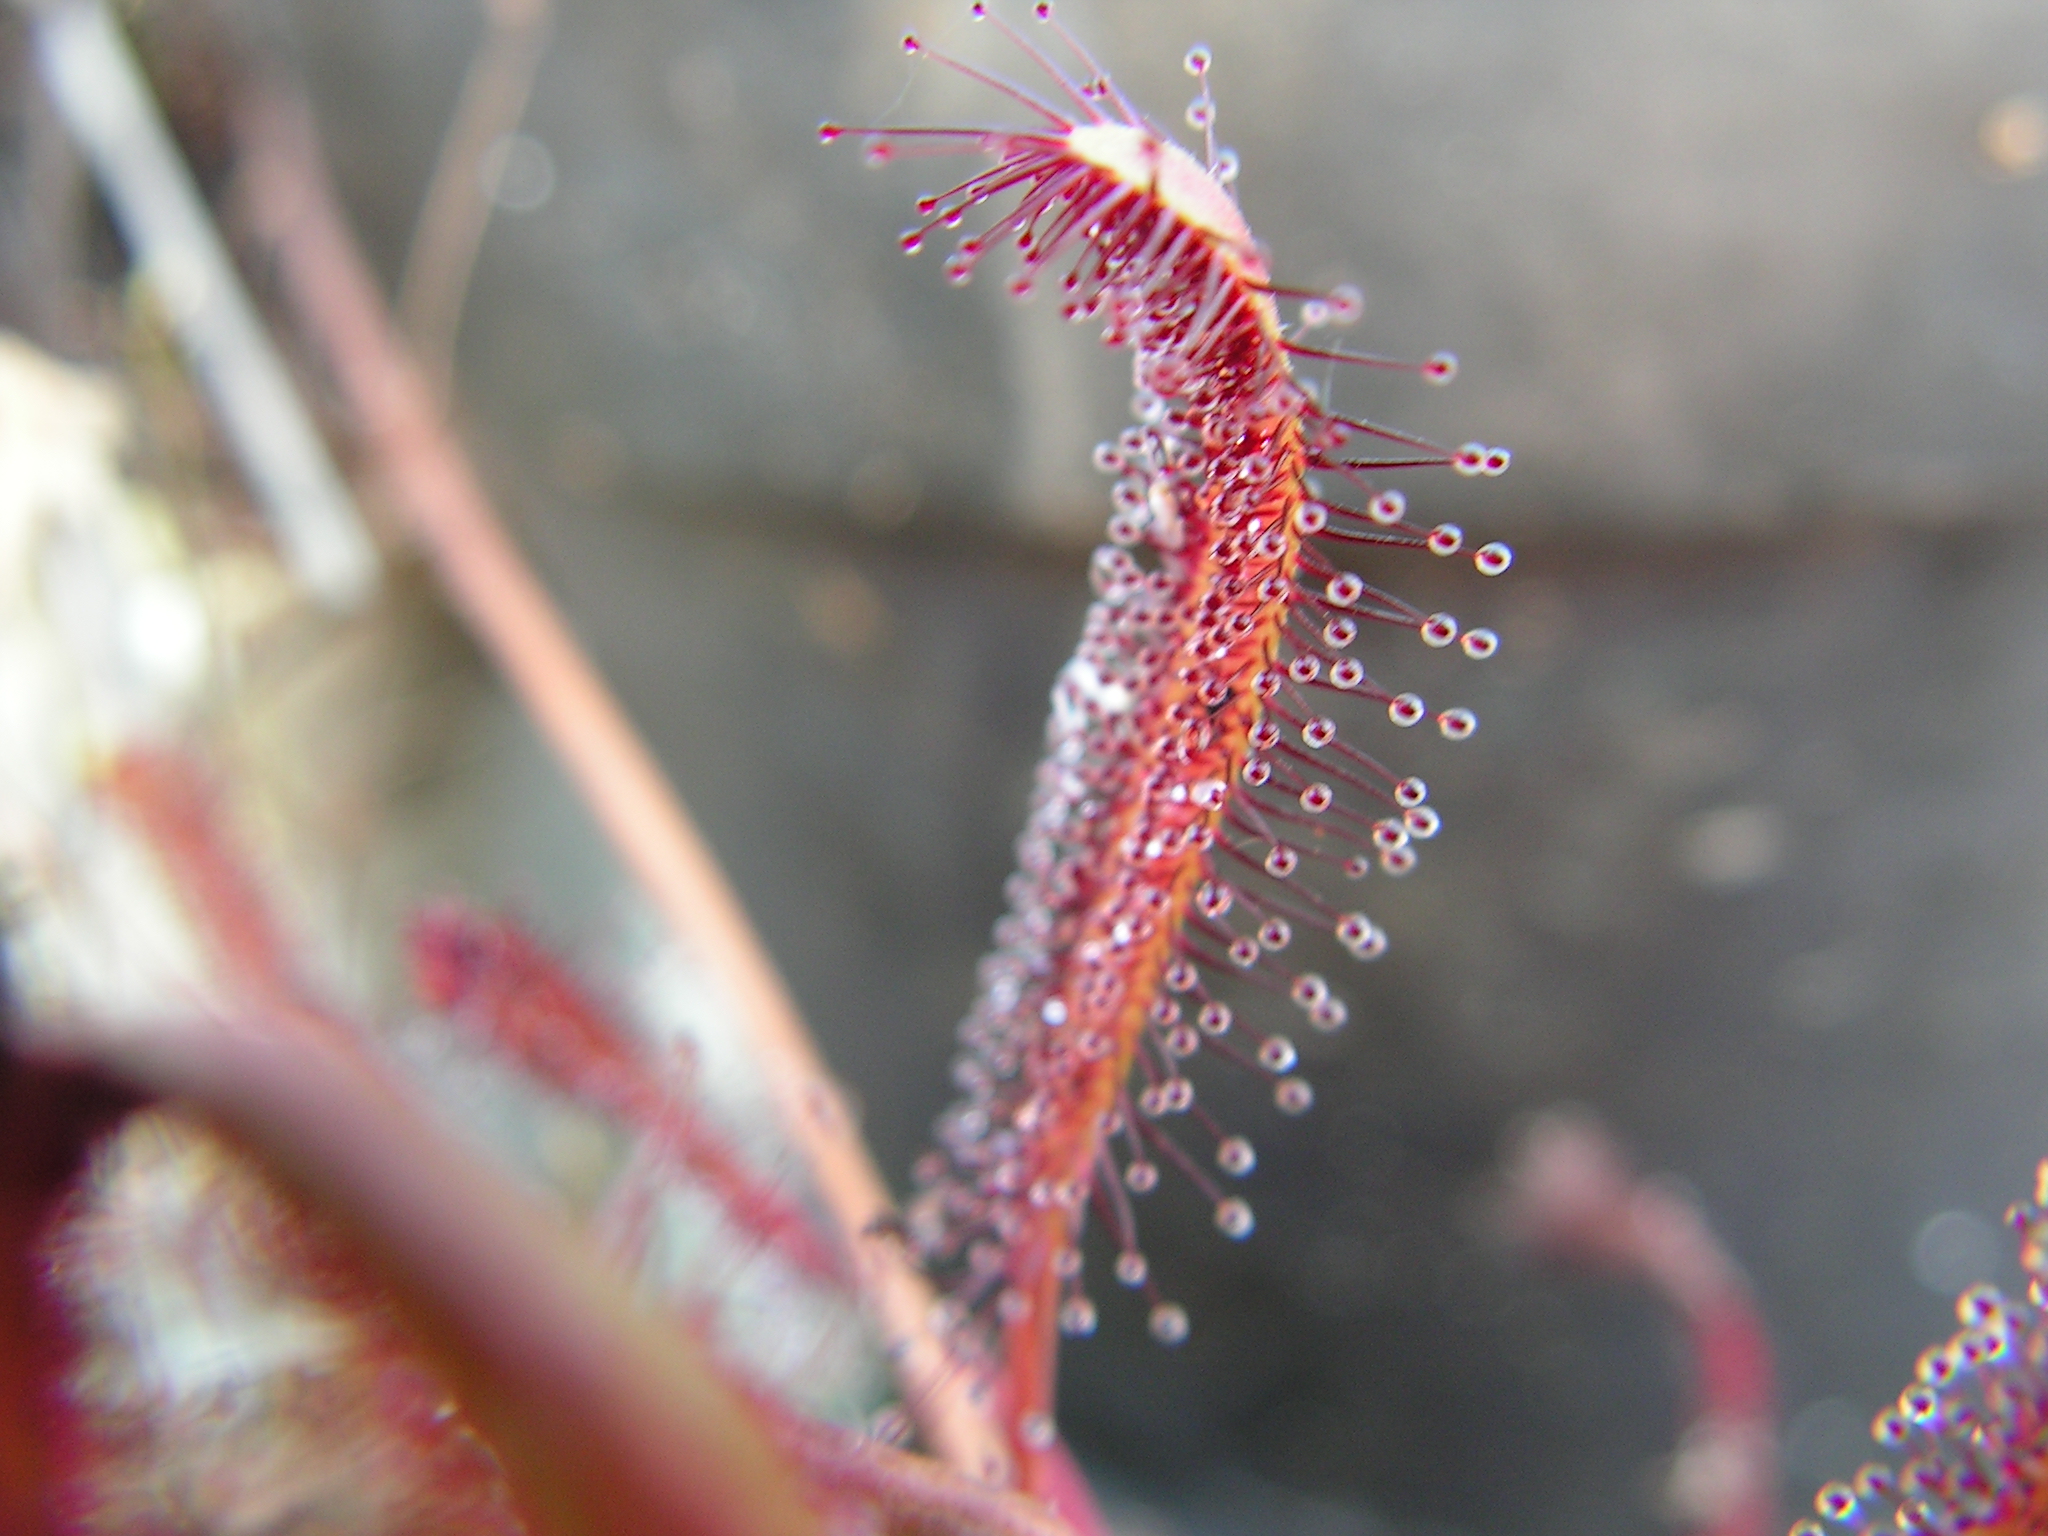 Drosera capensis ’All red’ cserepes